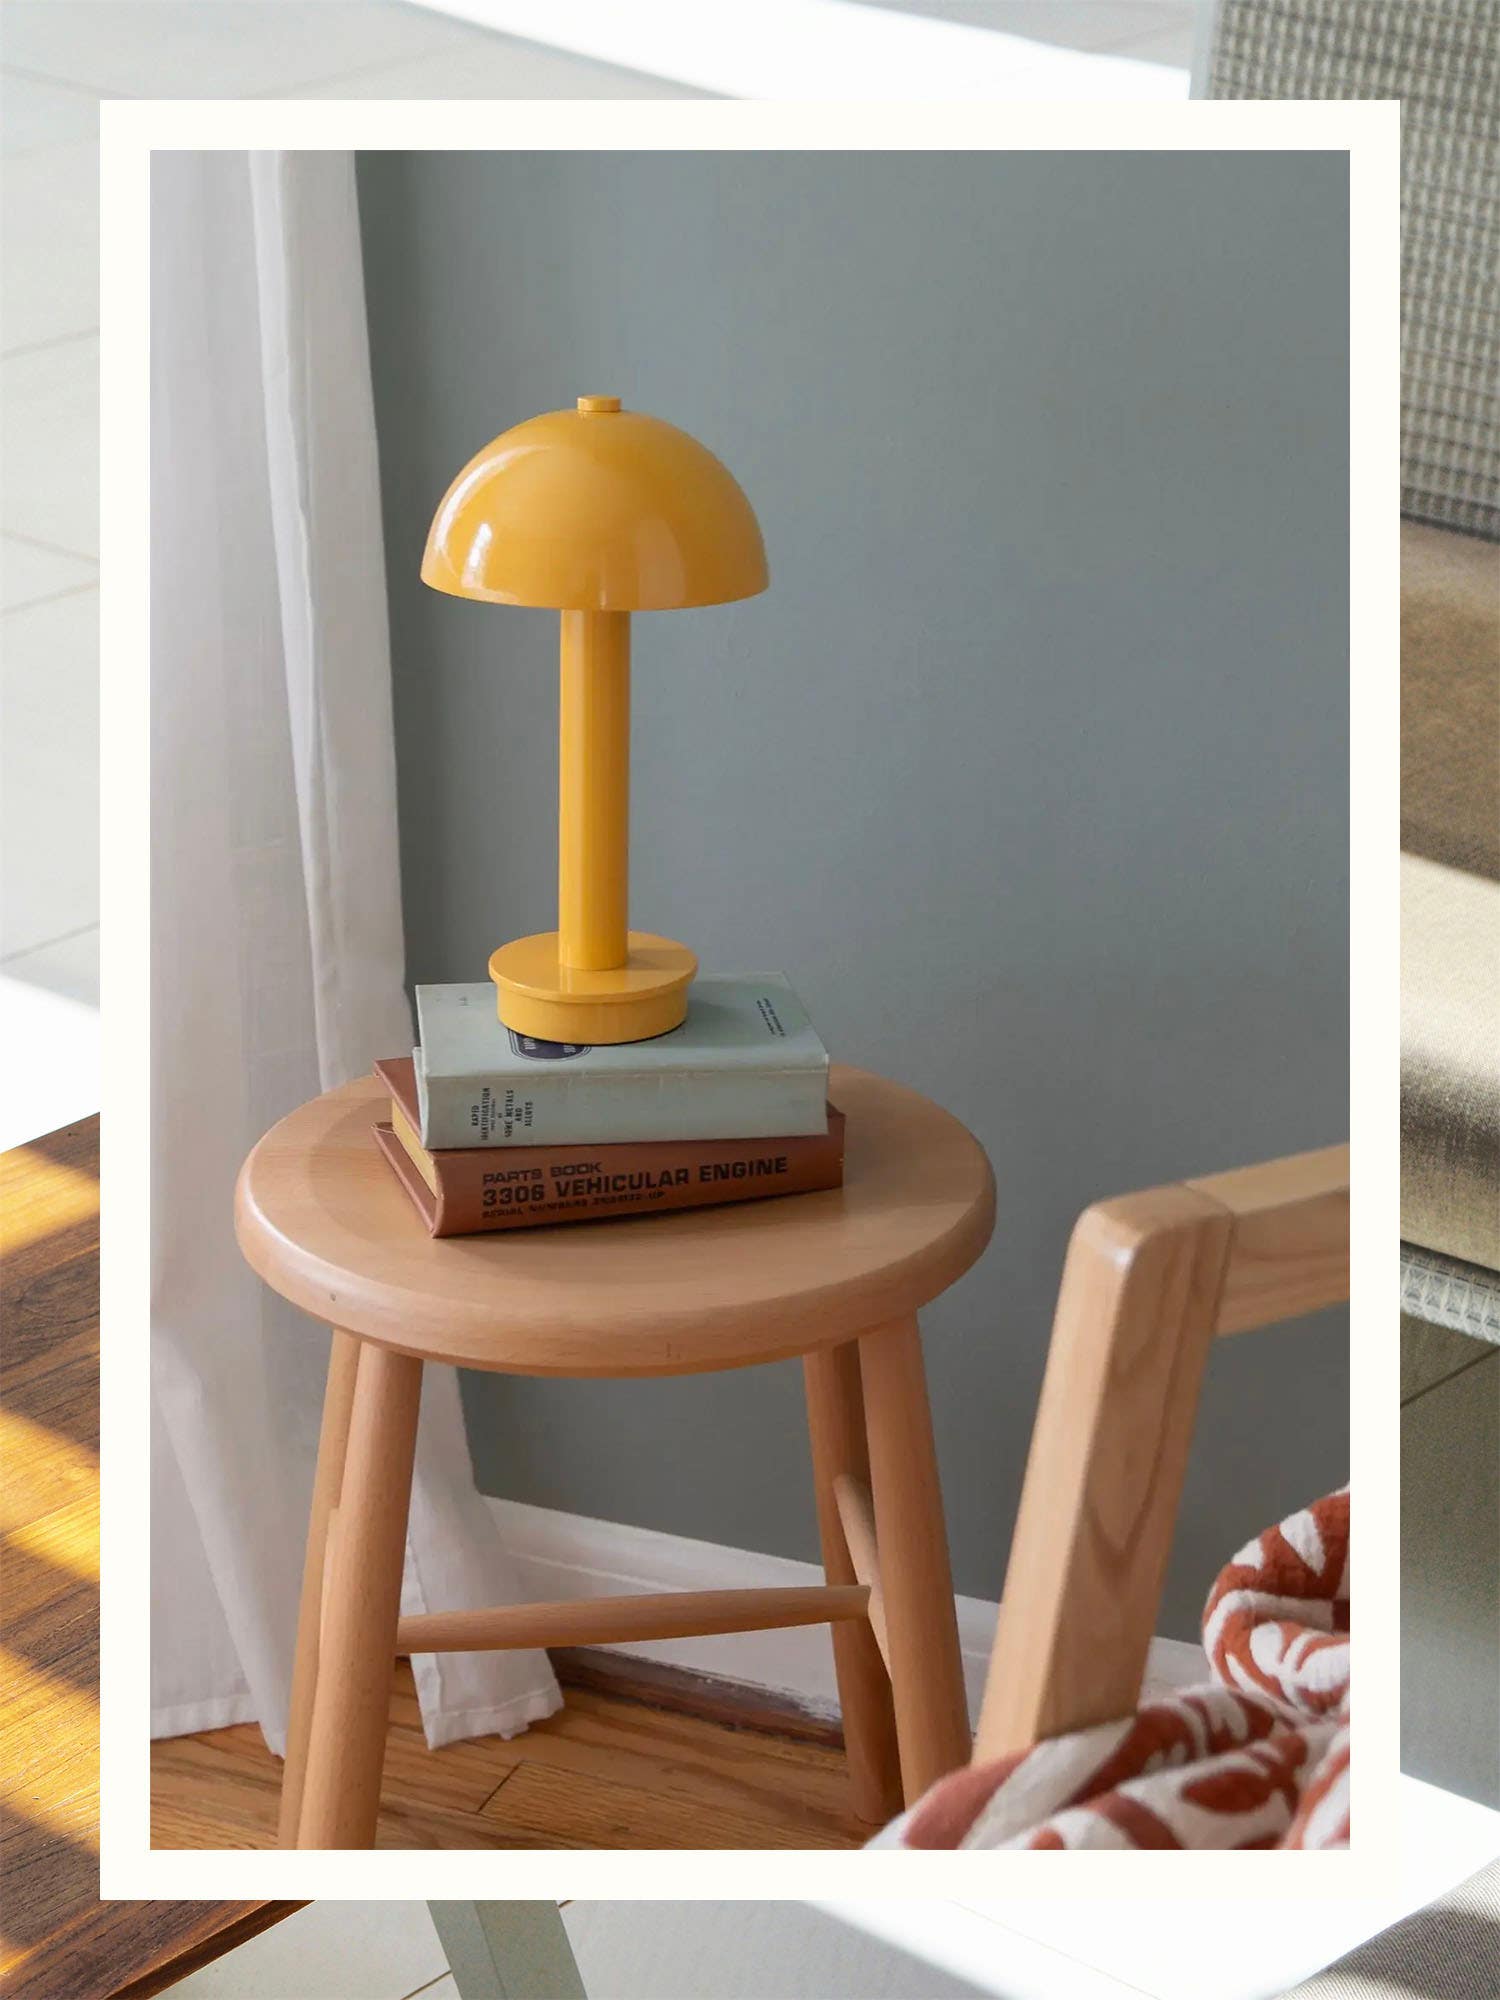 18 Portable Table Lamps That Let You Take the Glow With You